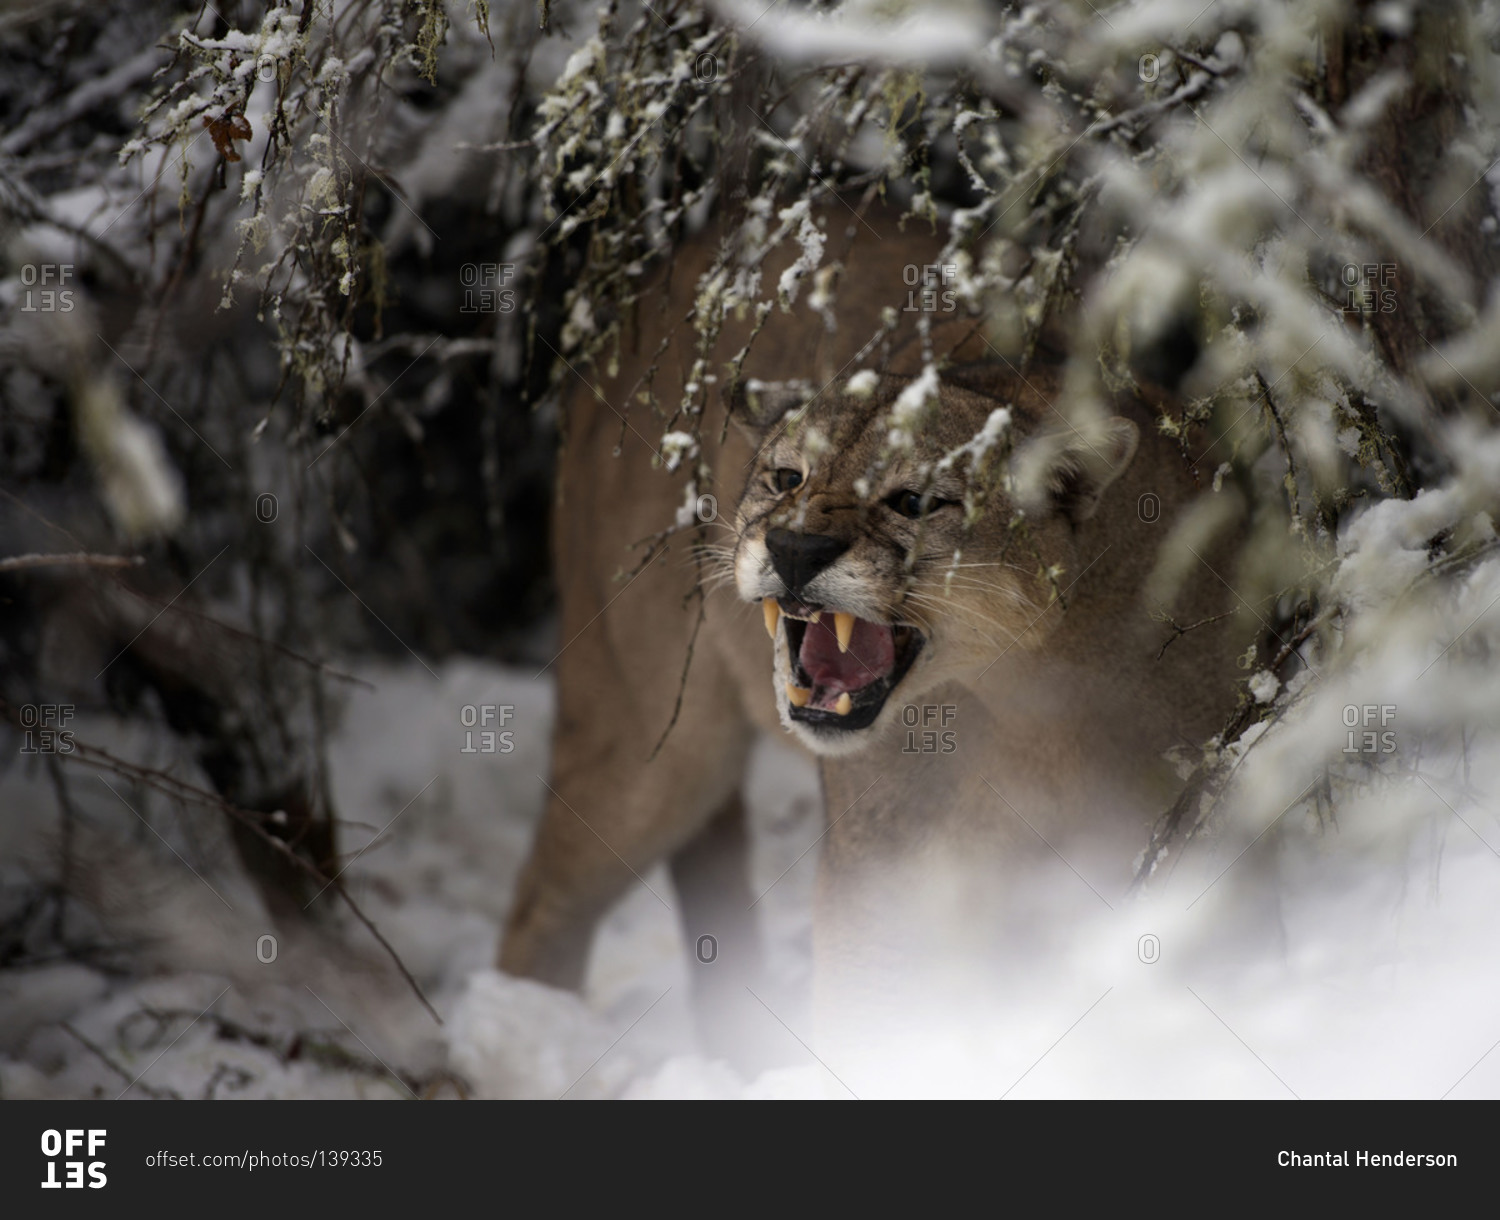 Puma snarling in the snow